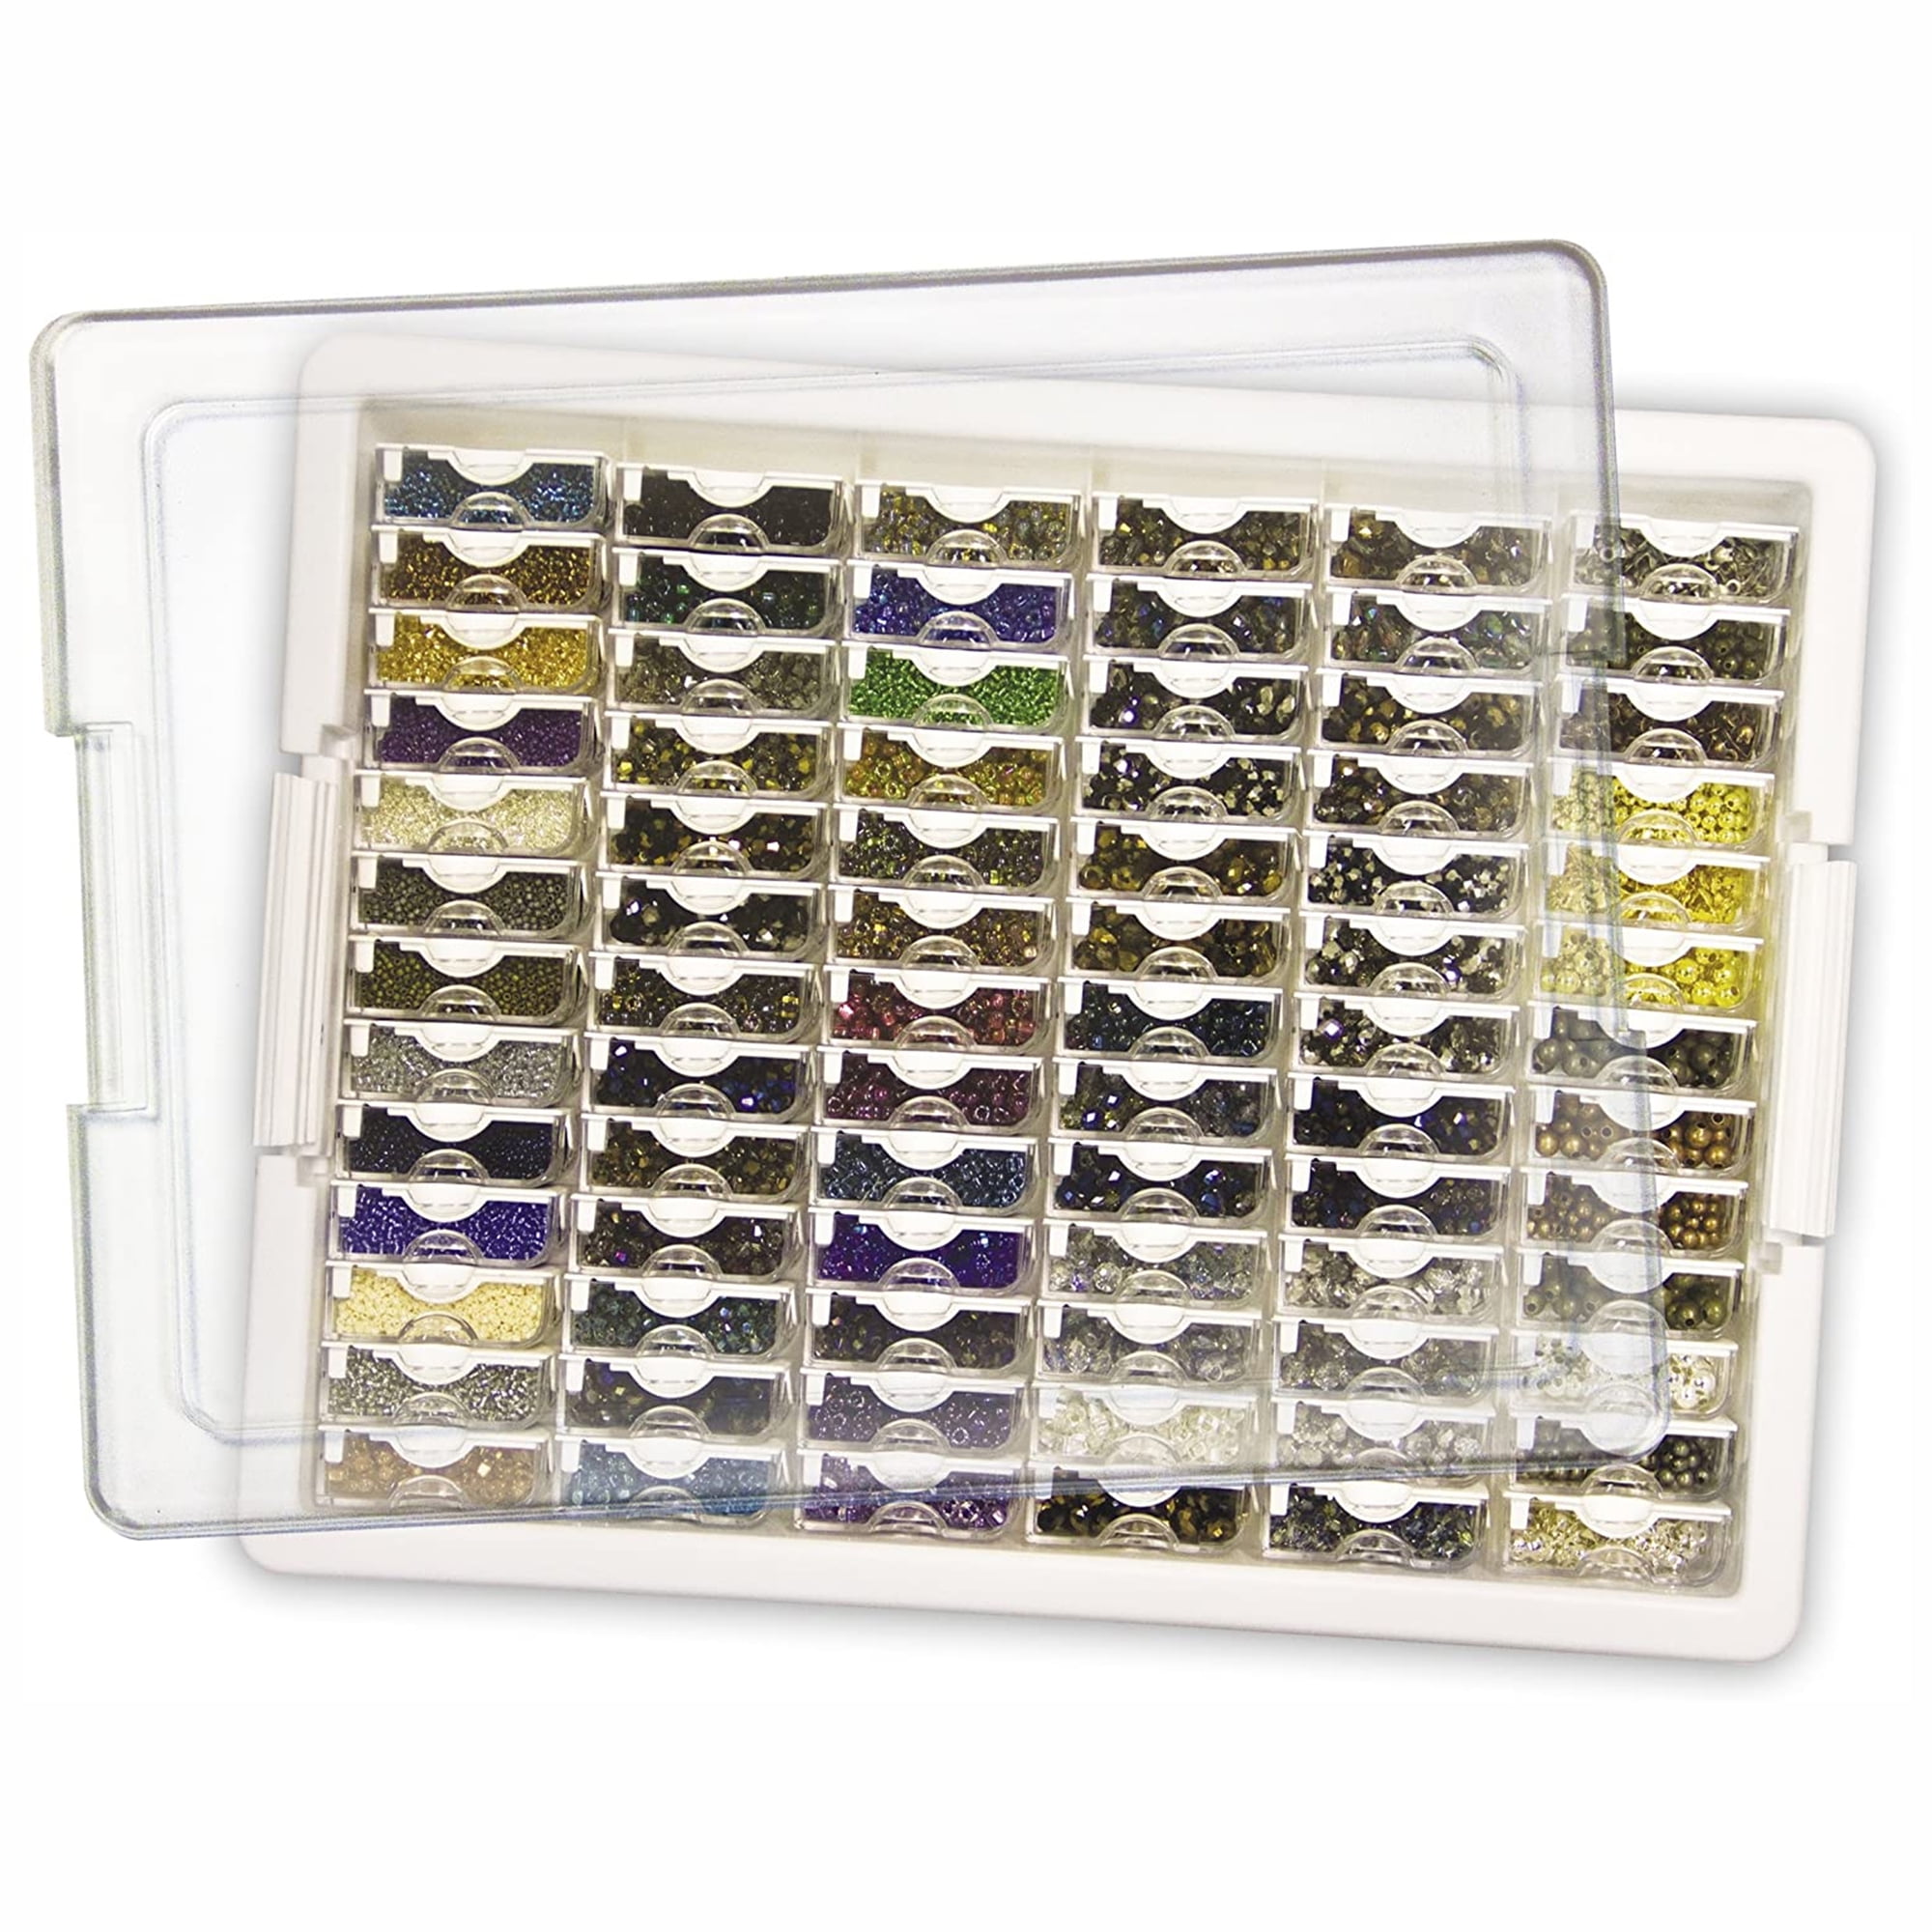 Rebrilliant Elizabeth Ward Mixed Bead Tray With Jewelry Findings